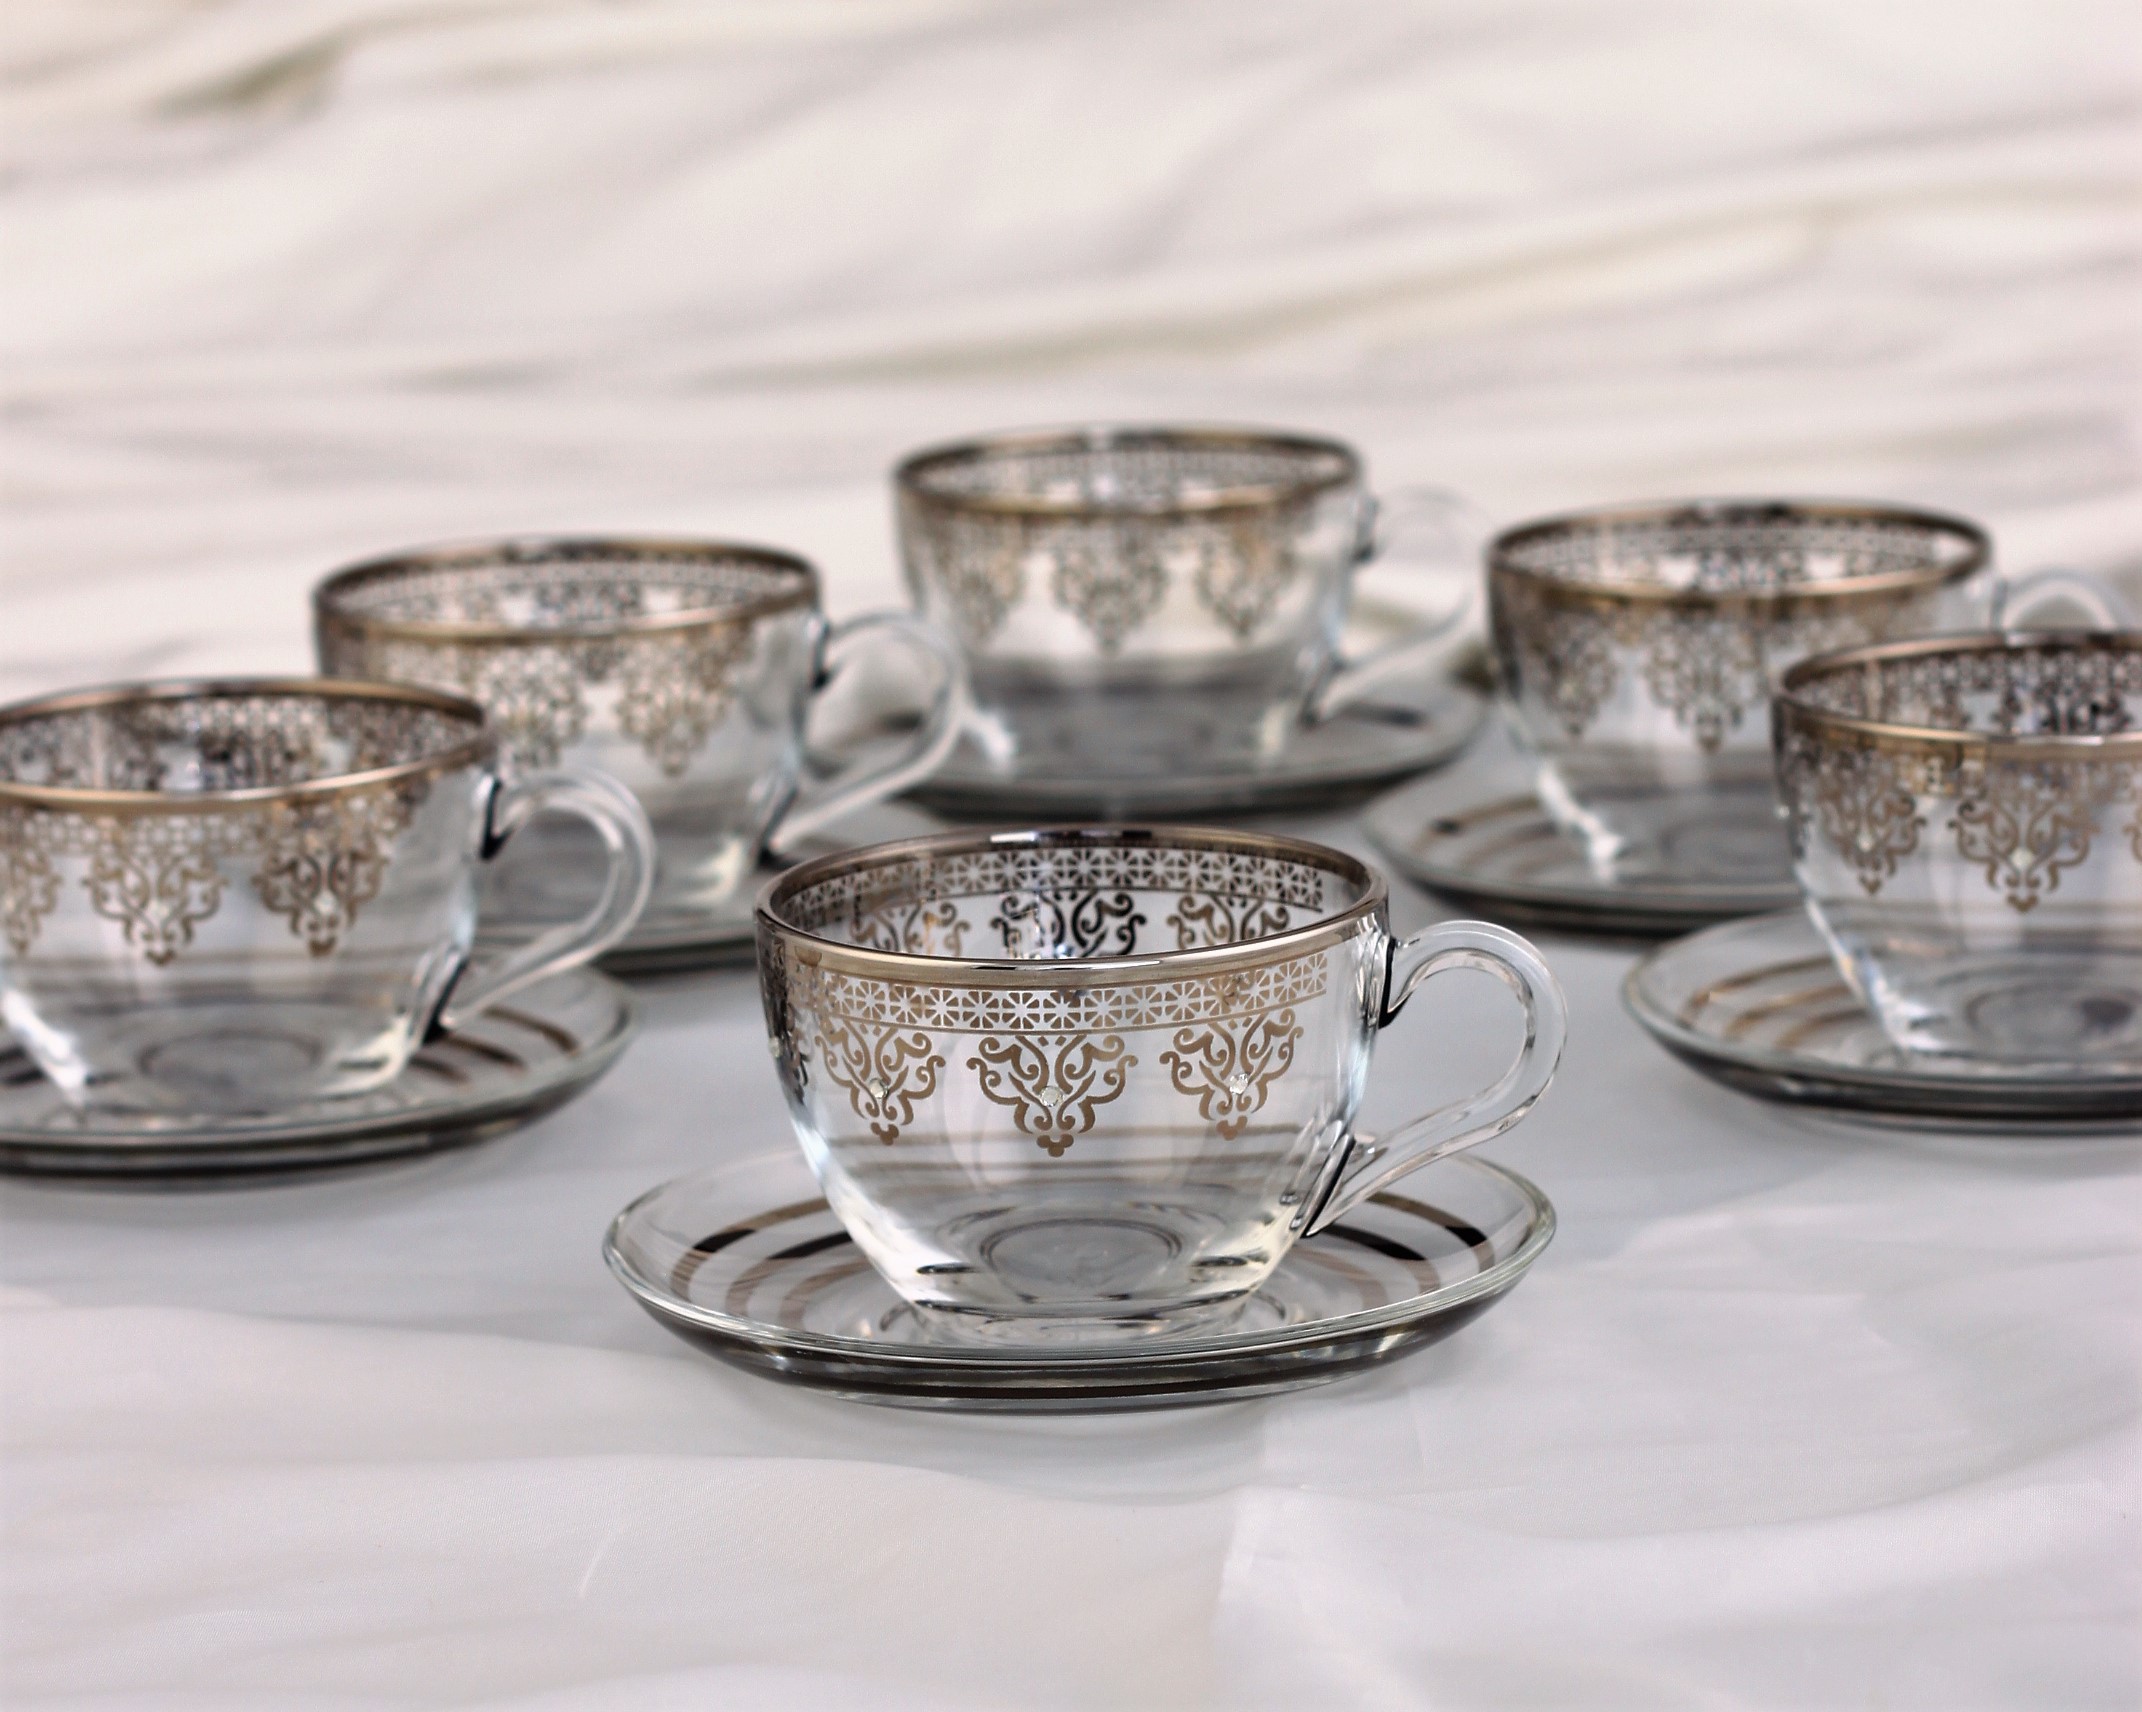 https://traditionalturk.com/wp-content/uploads/2020/04/large-silver-color-coffee-mugs-tea-glasses-for-six-person-1.jpg